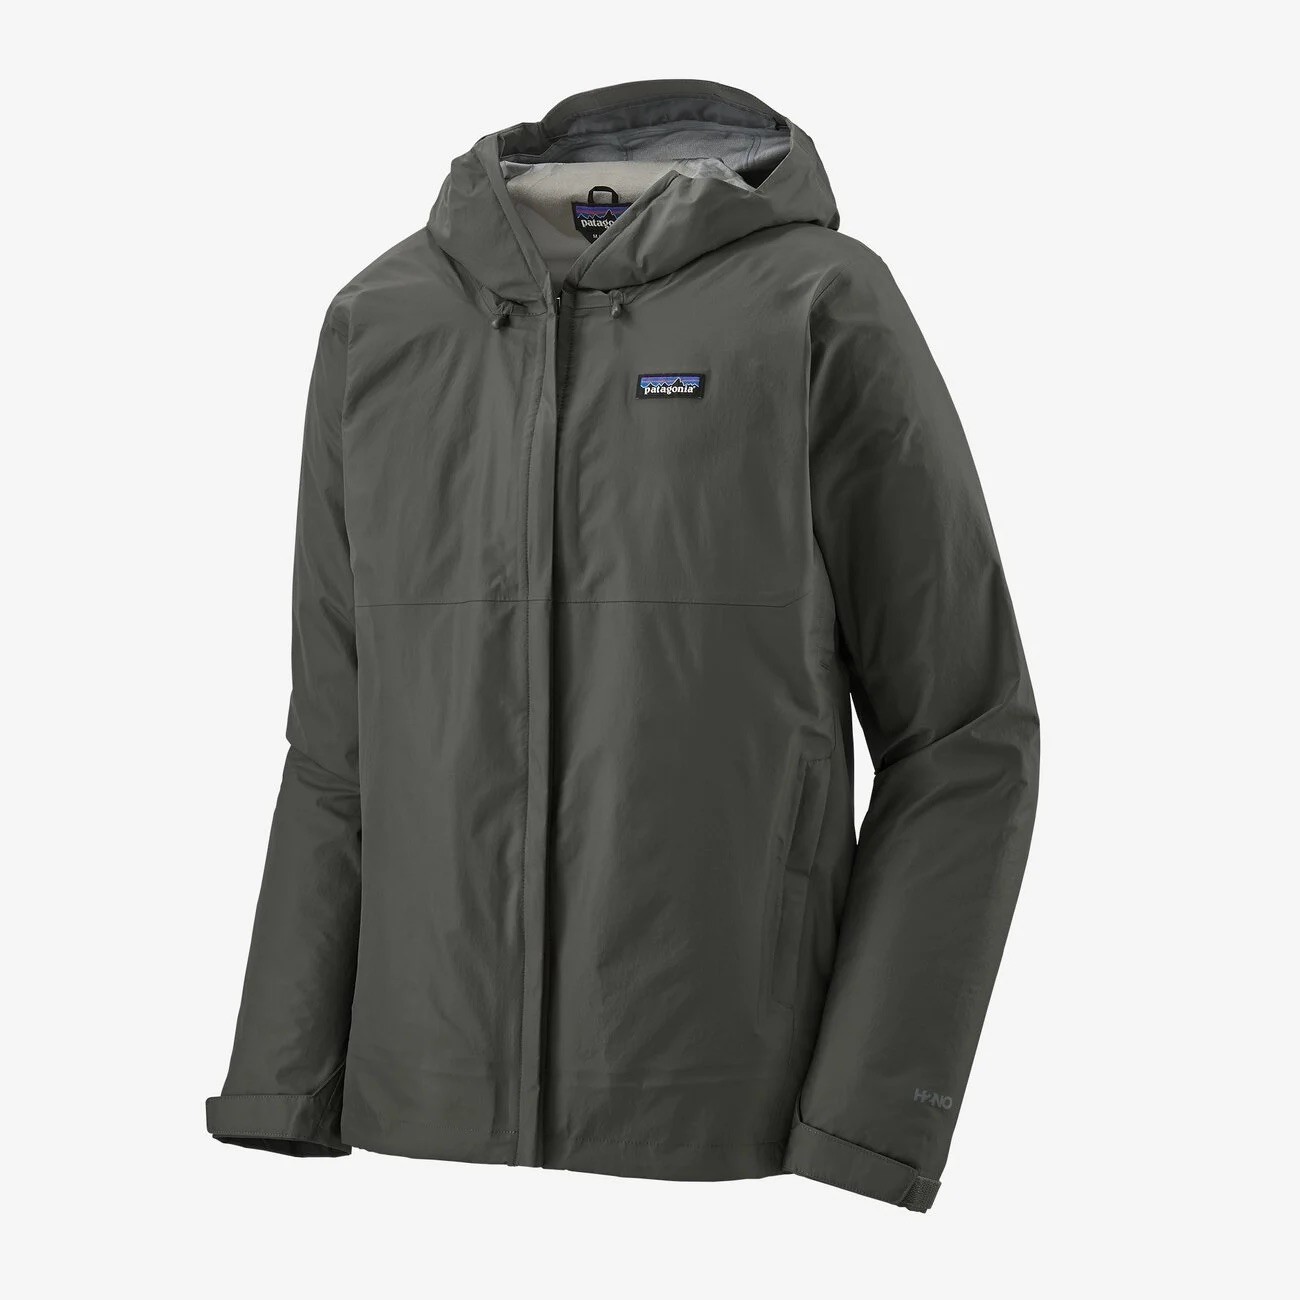 Patagonia M's Torrentshell 3L Jacket - Forge Grey - Small